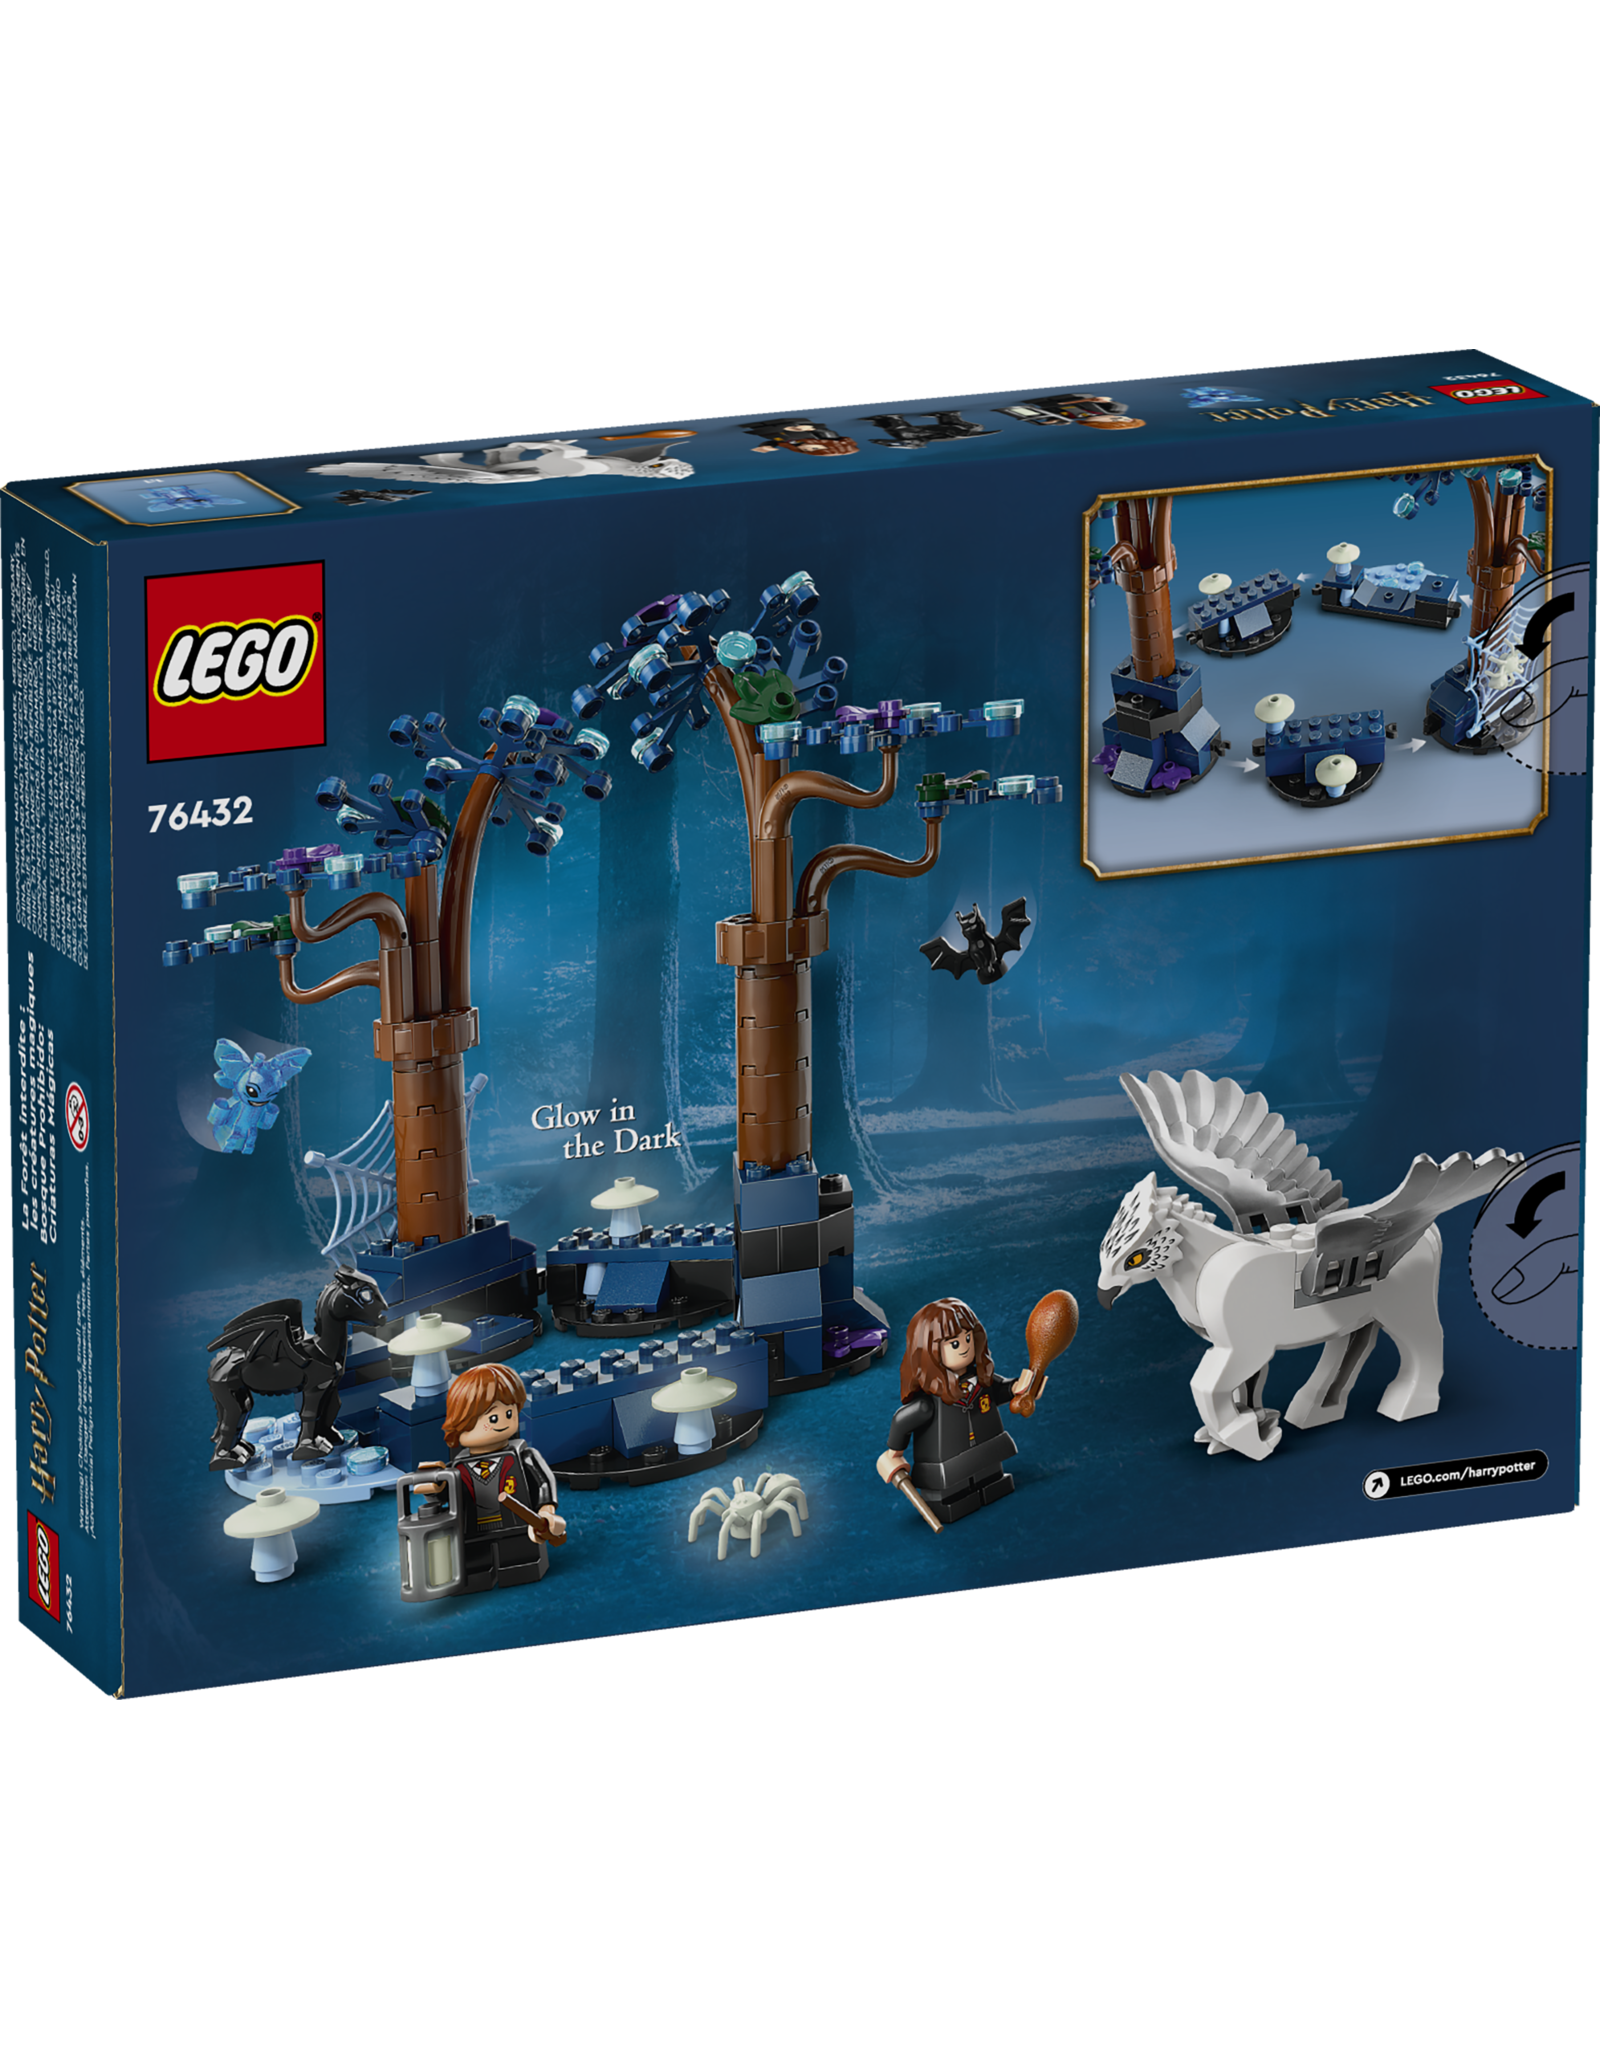 LEGO Harry Potter 76432 Forbidden Forest: Magical Creatures